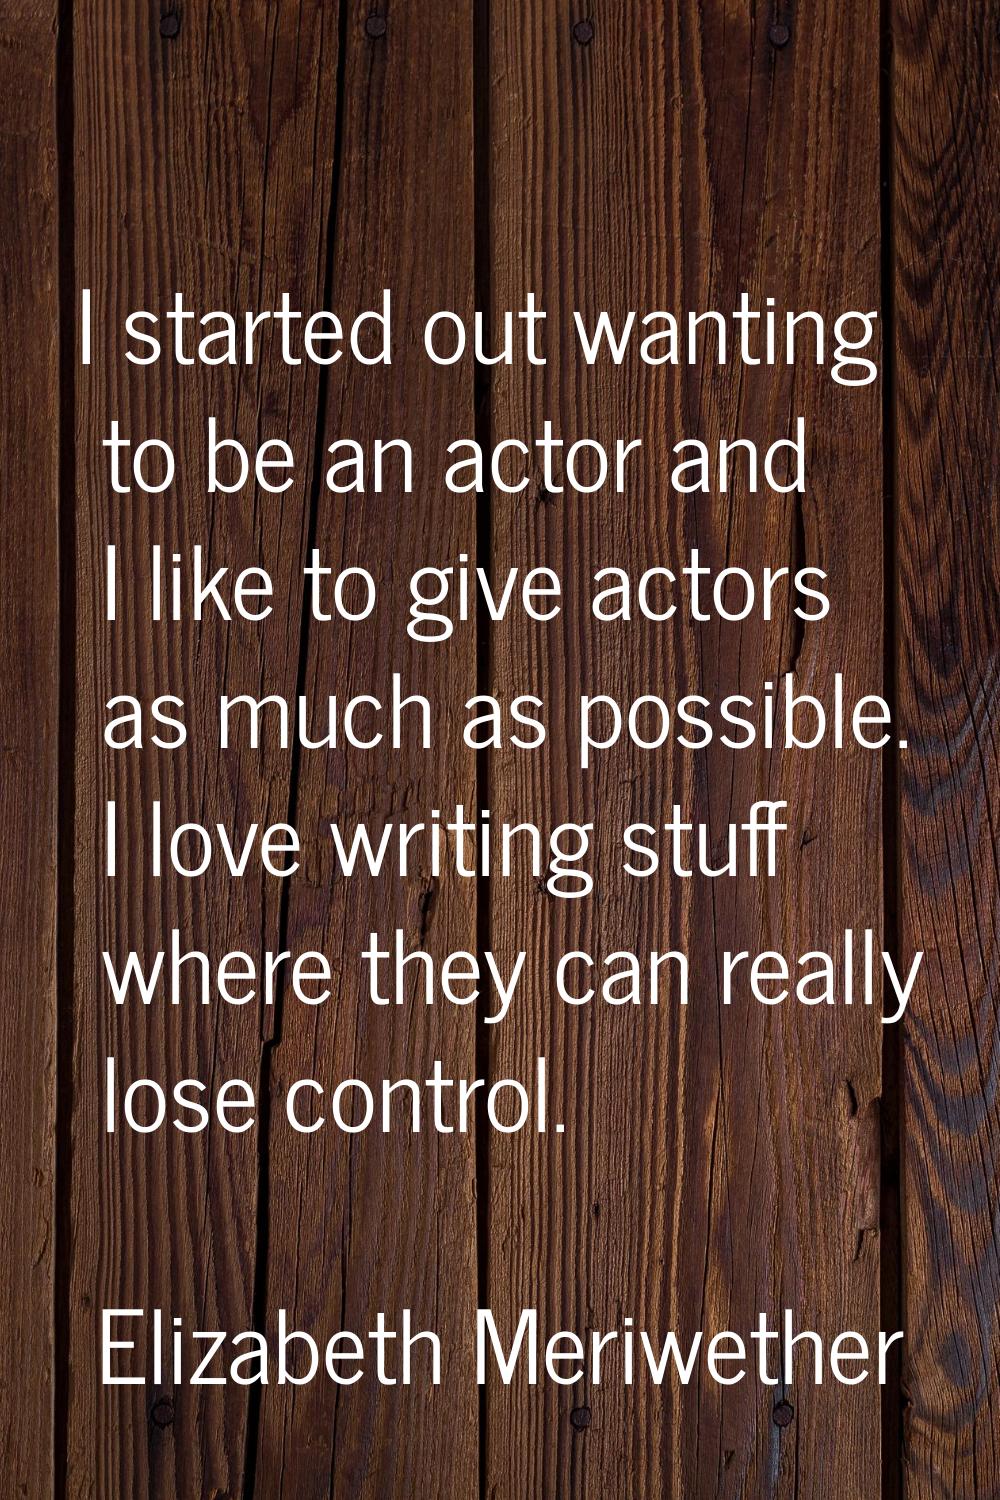 I started out wanting to be an actor and I like to give actors as much as possible. I love writing 